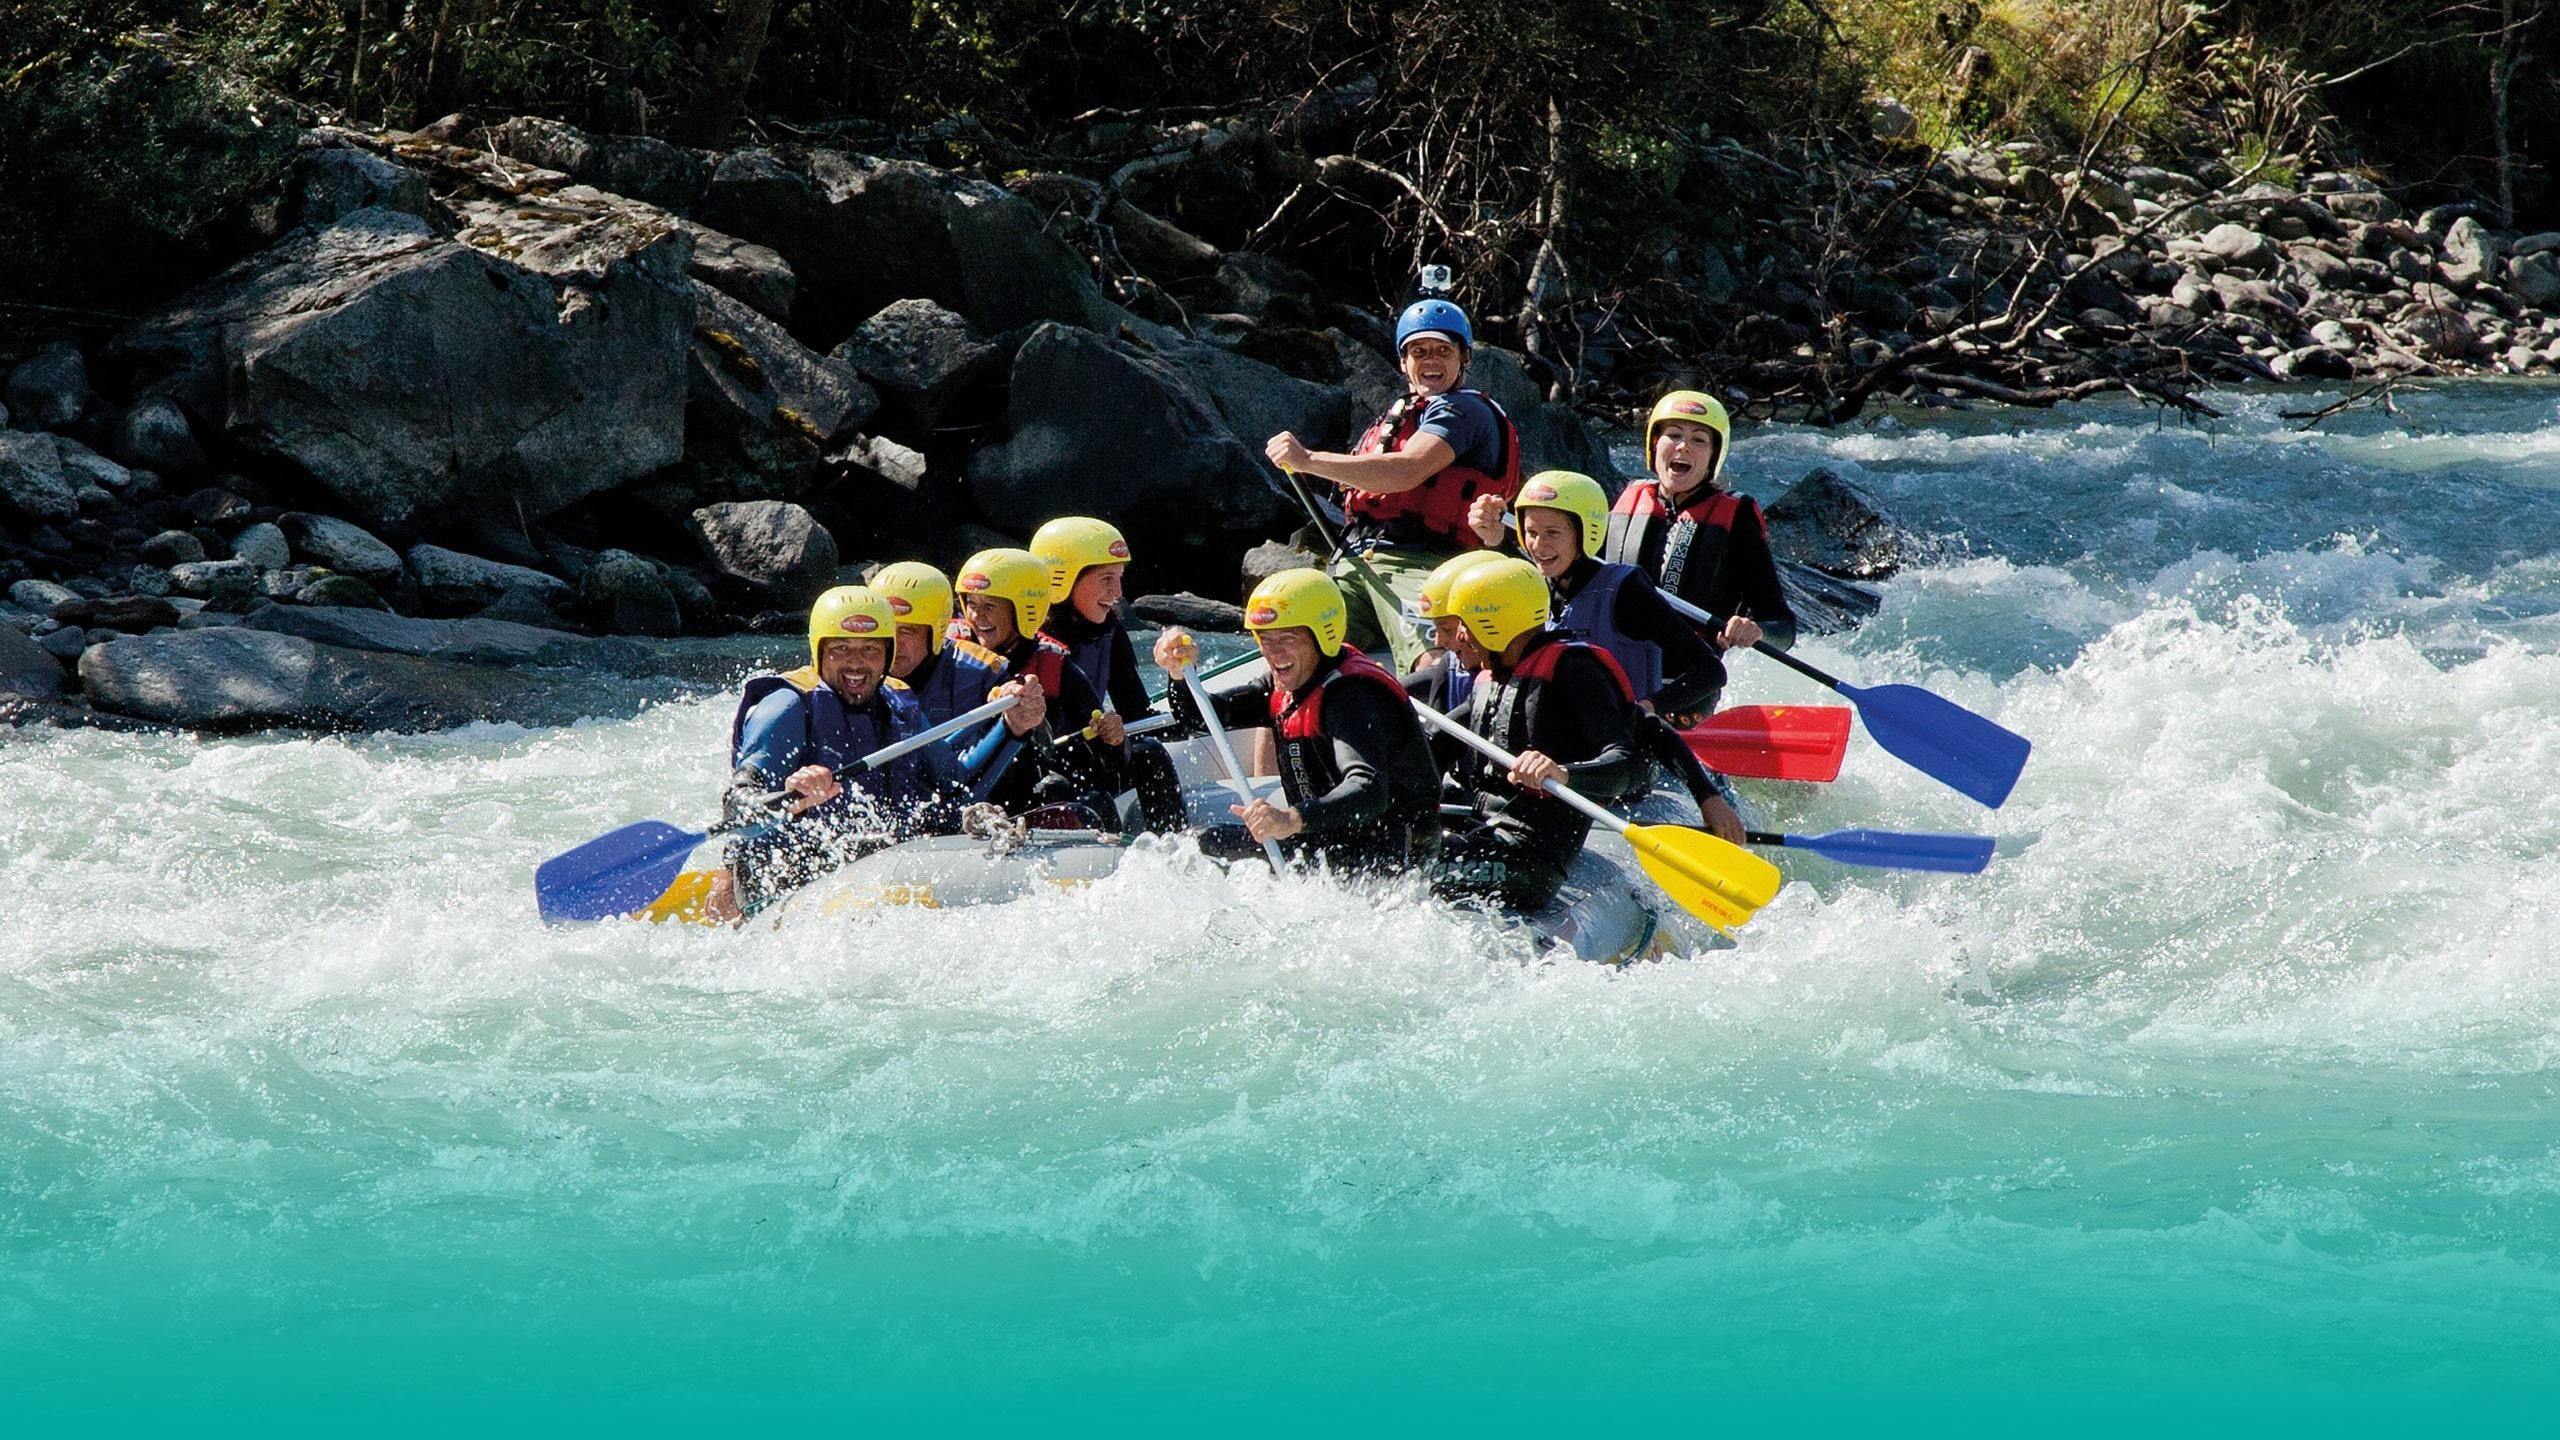 Rafting: A group of tourists moves down the whitewater rapids, Active sports discipline. 2560x1440 HD Background.